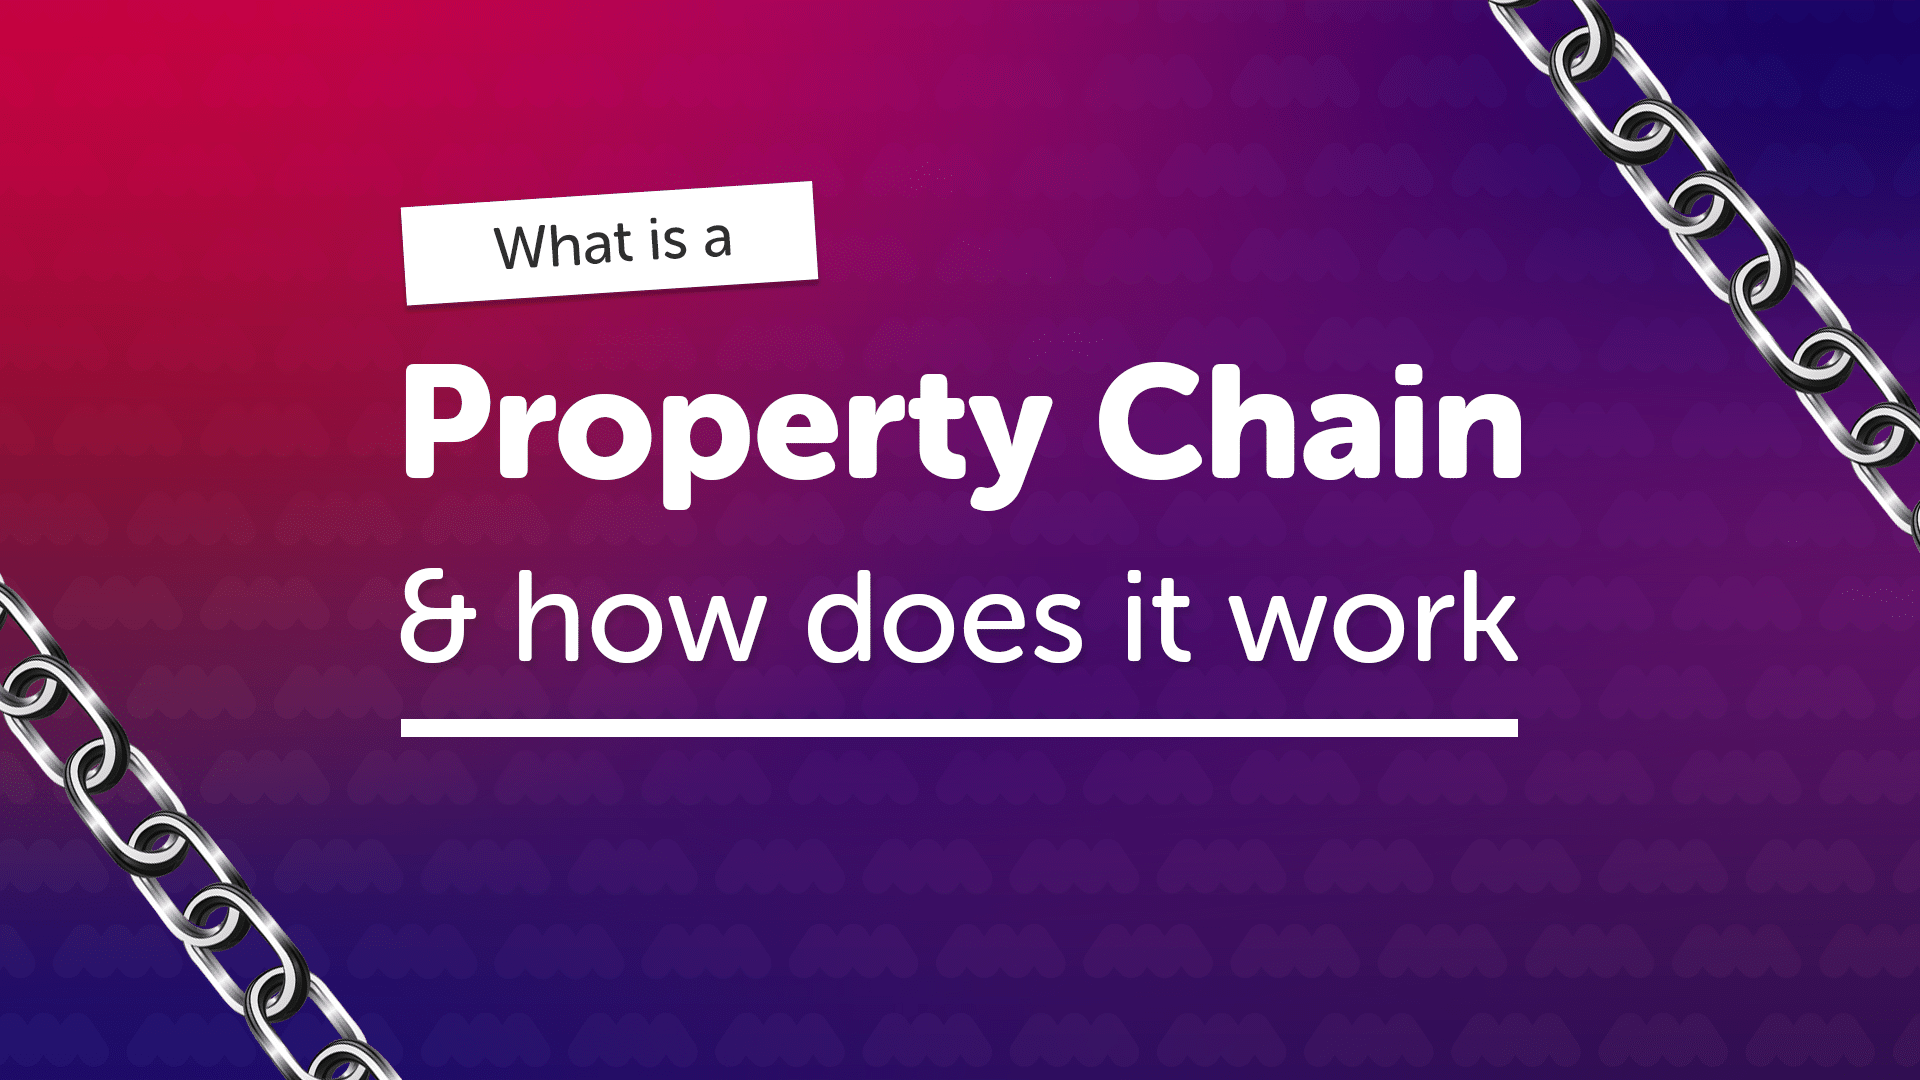 What is a Property Chain in Hull